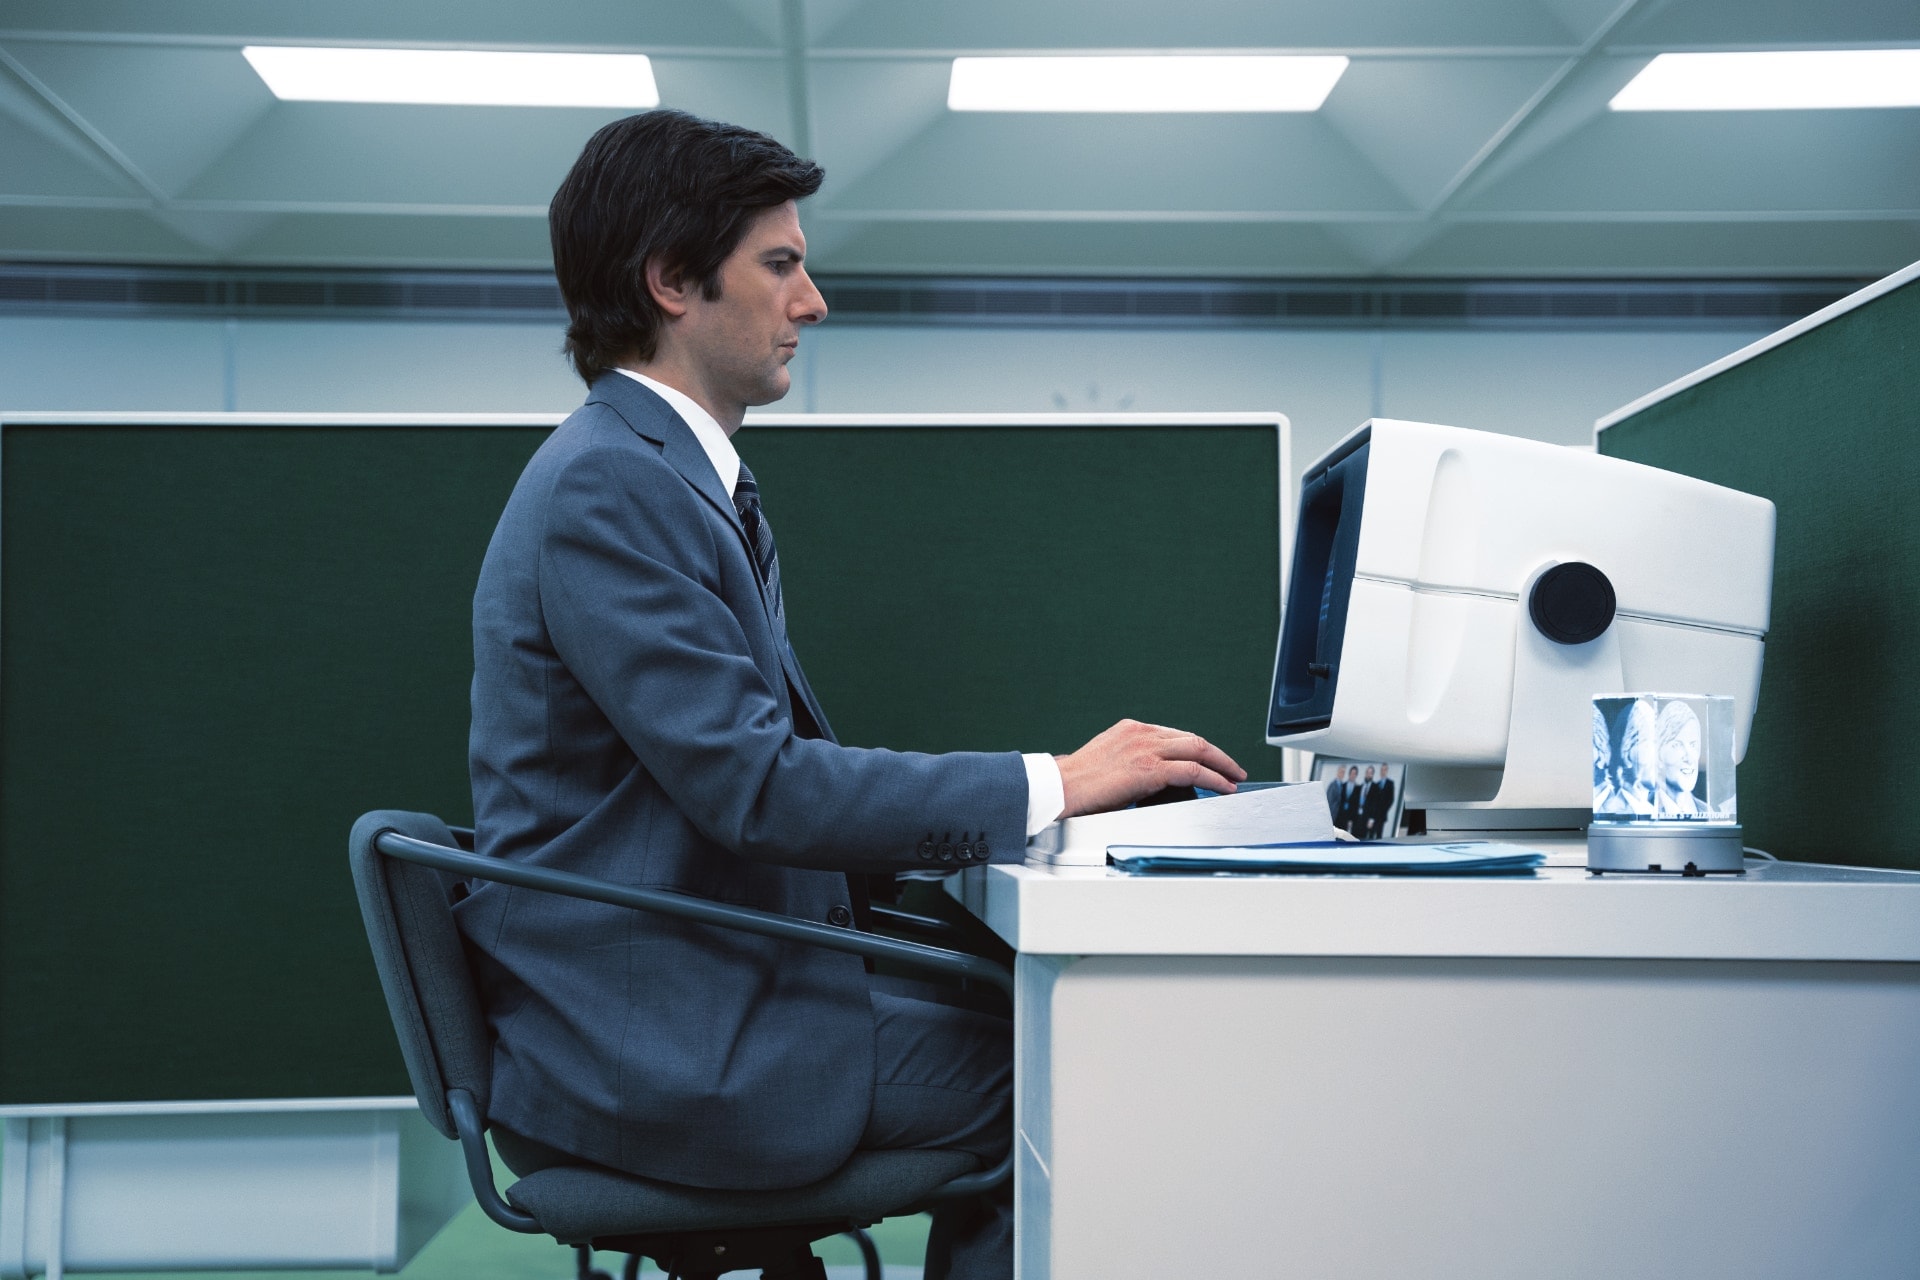 A white man, short hair, sit on his desk, in front an old-fashioned computer, in an old-fashioned office environment.